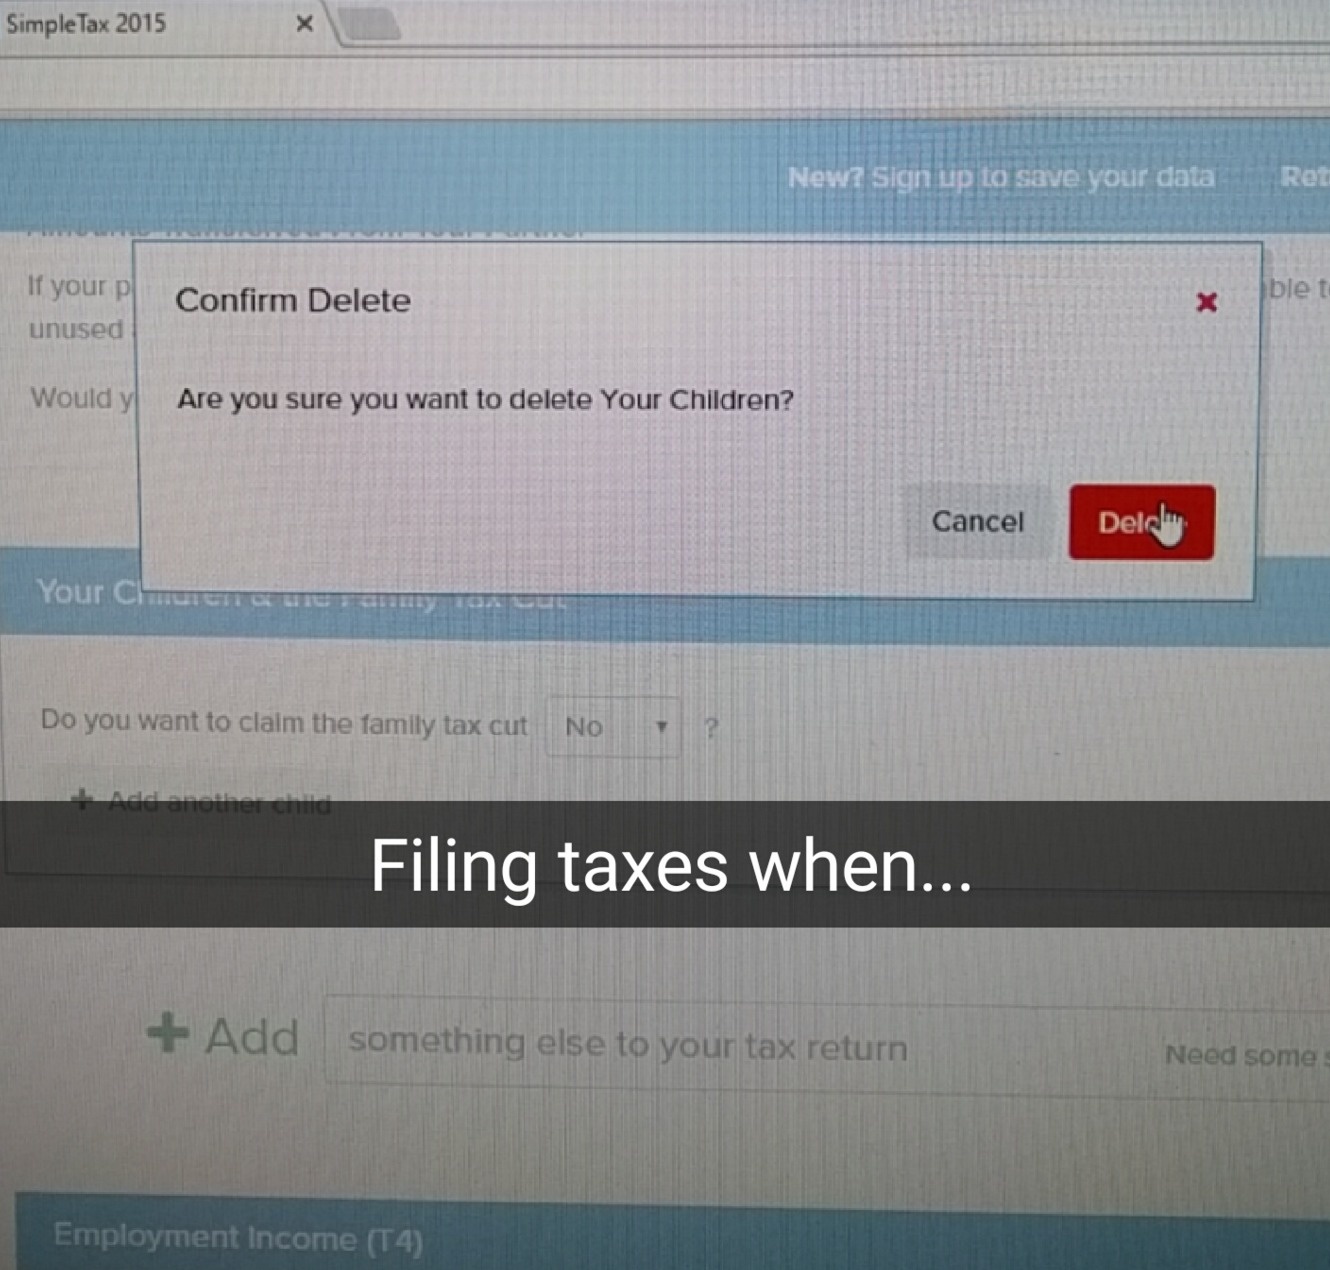 software - Simple Tax 2015 New? Sign up to save your data Ret If your p unused Confirm Delete blet Would y Are you sure you want to delete Your Children? Cancel Delcu Your Che Do you want to claim the family tax cut No Filing taxes when... Add something e